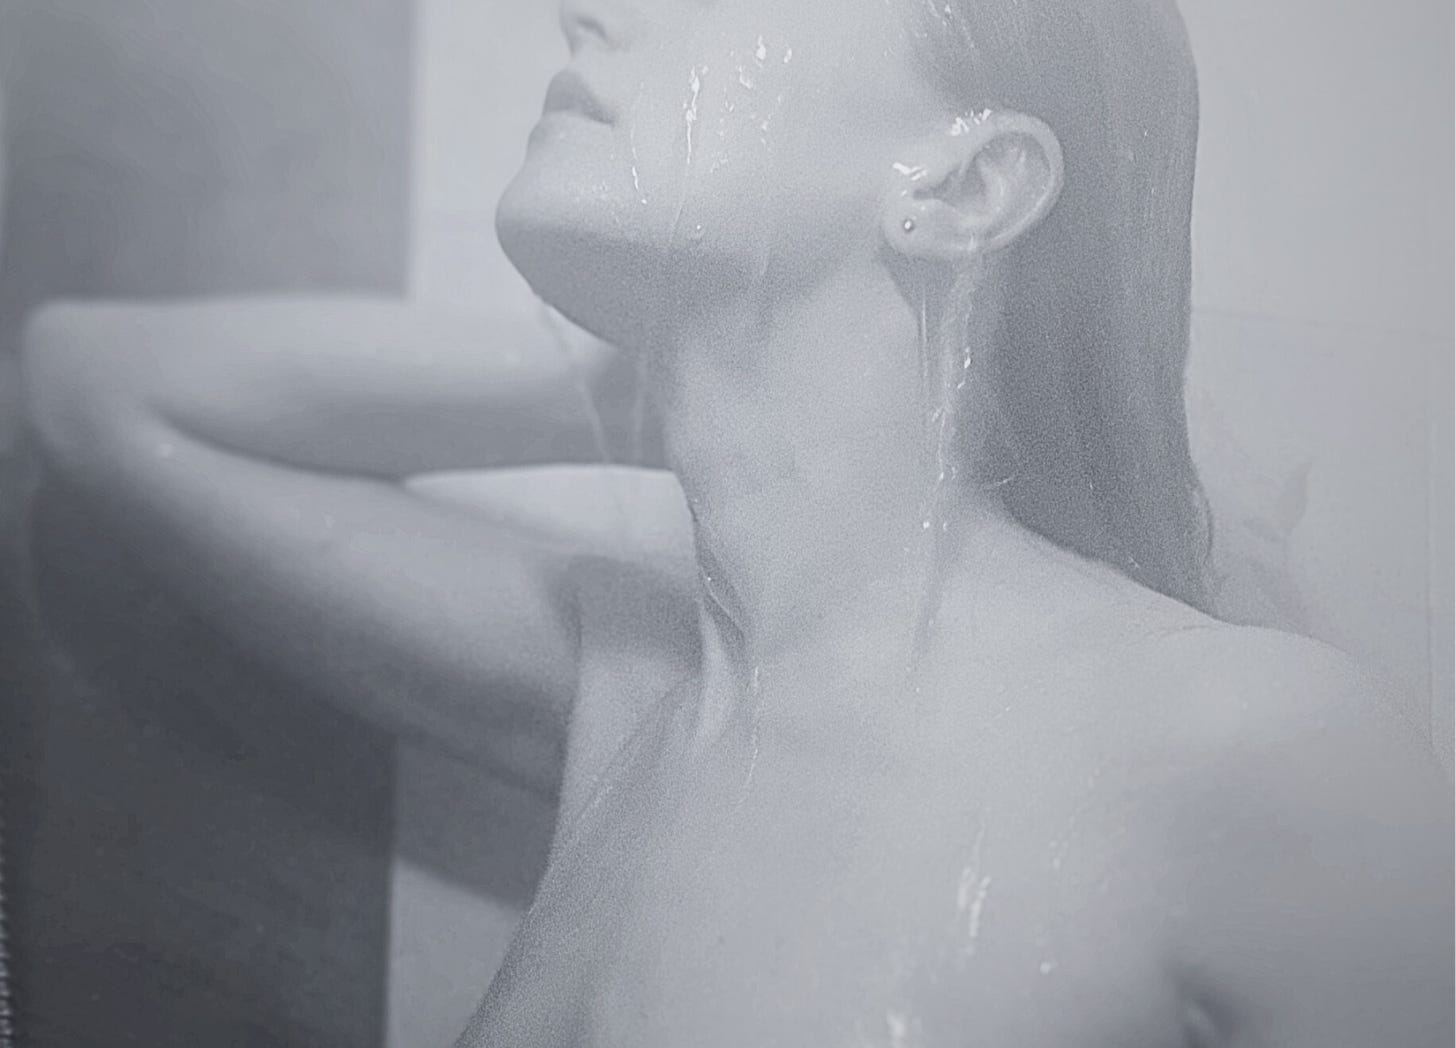 naked woman under shower, face closeup, running water, black and white image